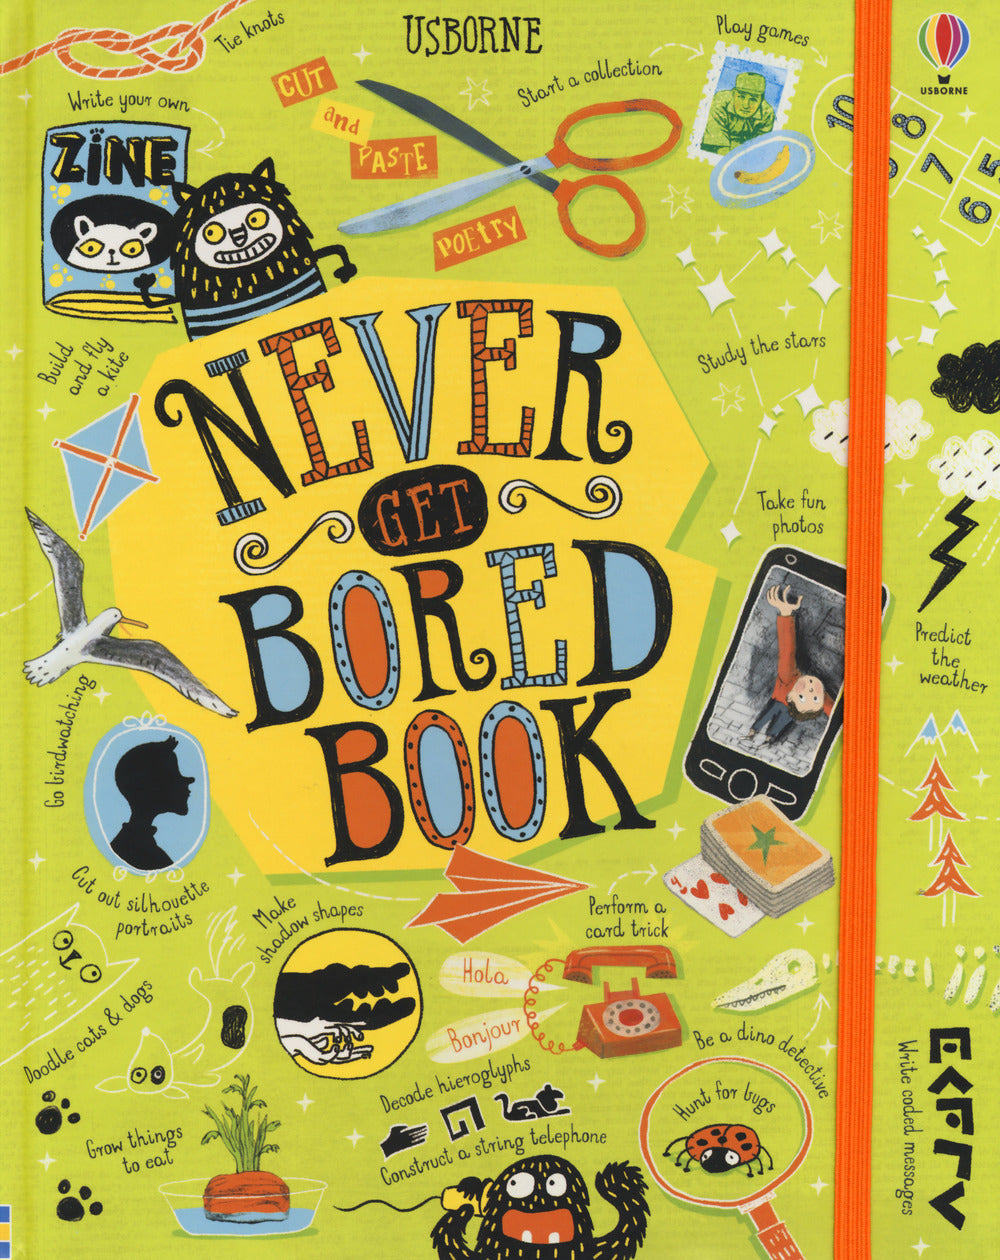 Never get bored book.